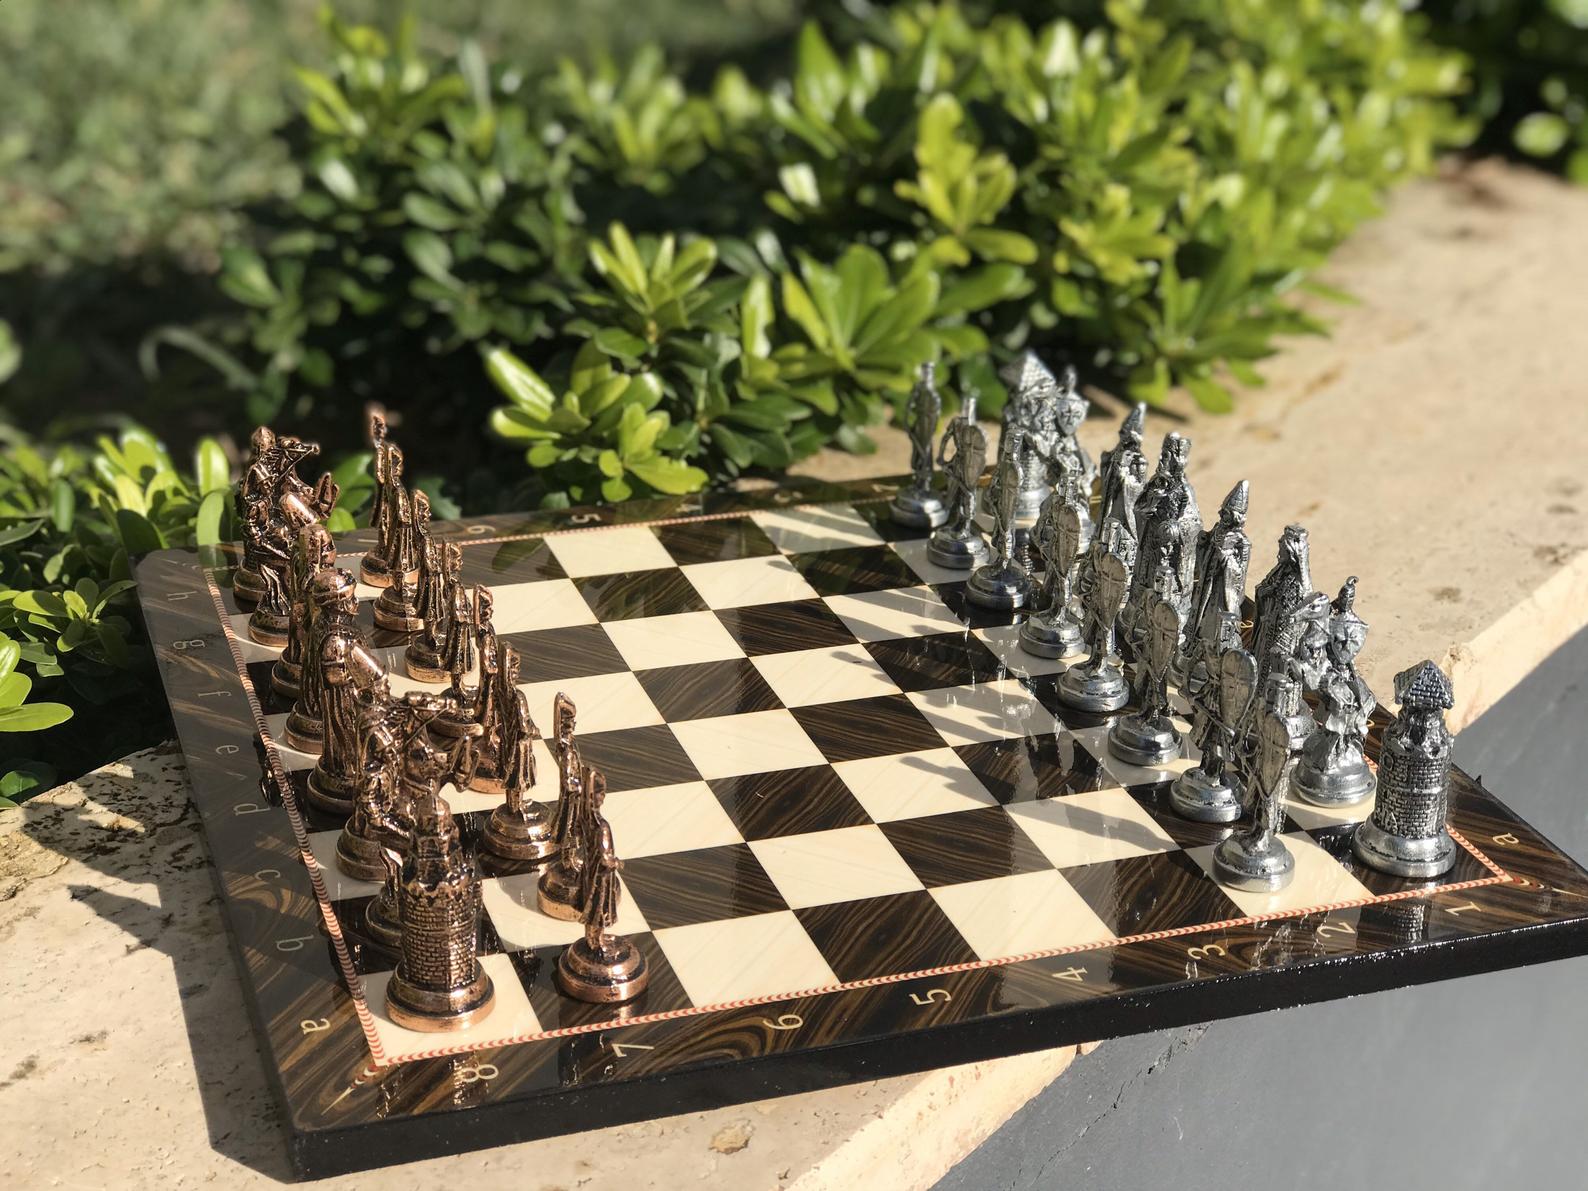 12 Best Chess Sets of 2021